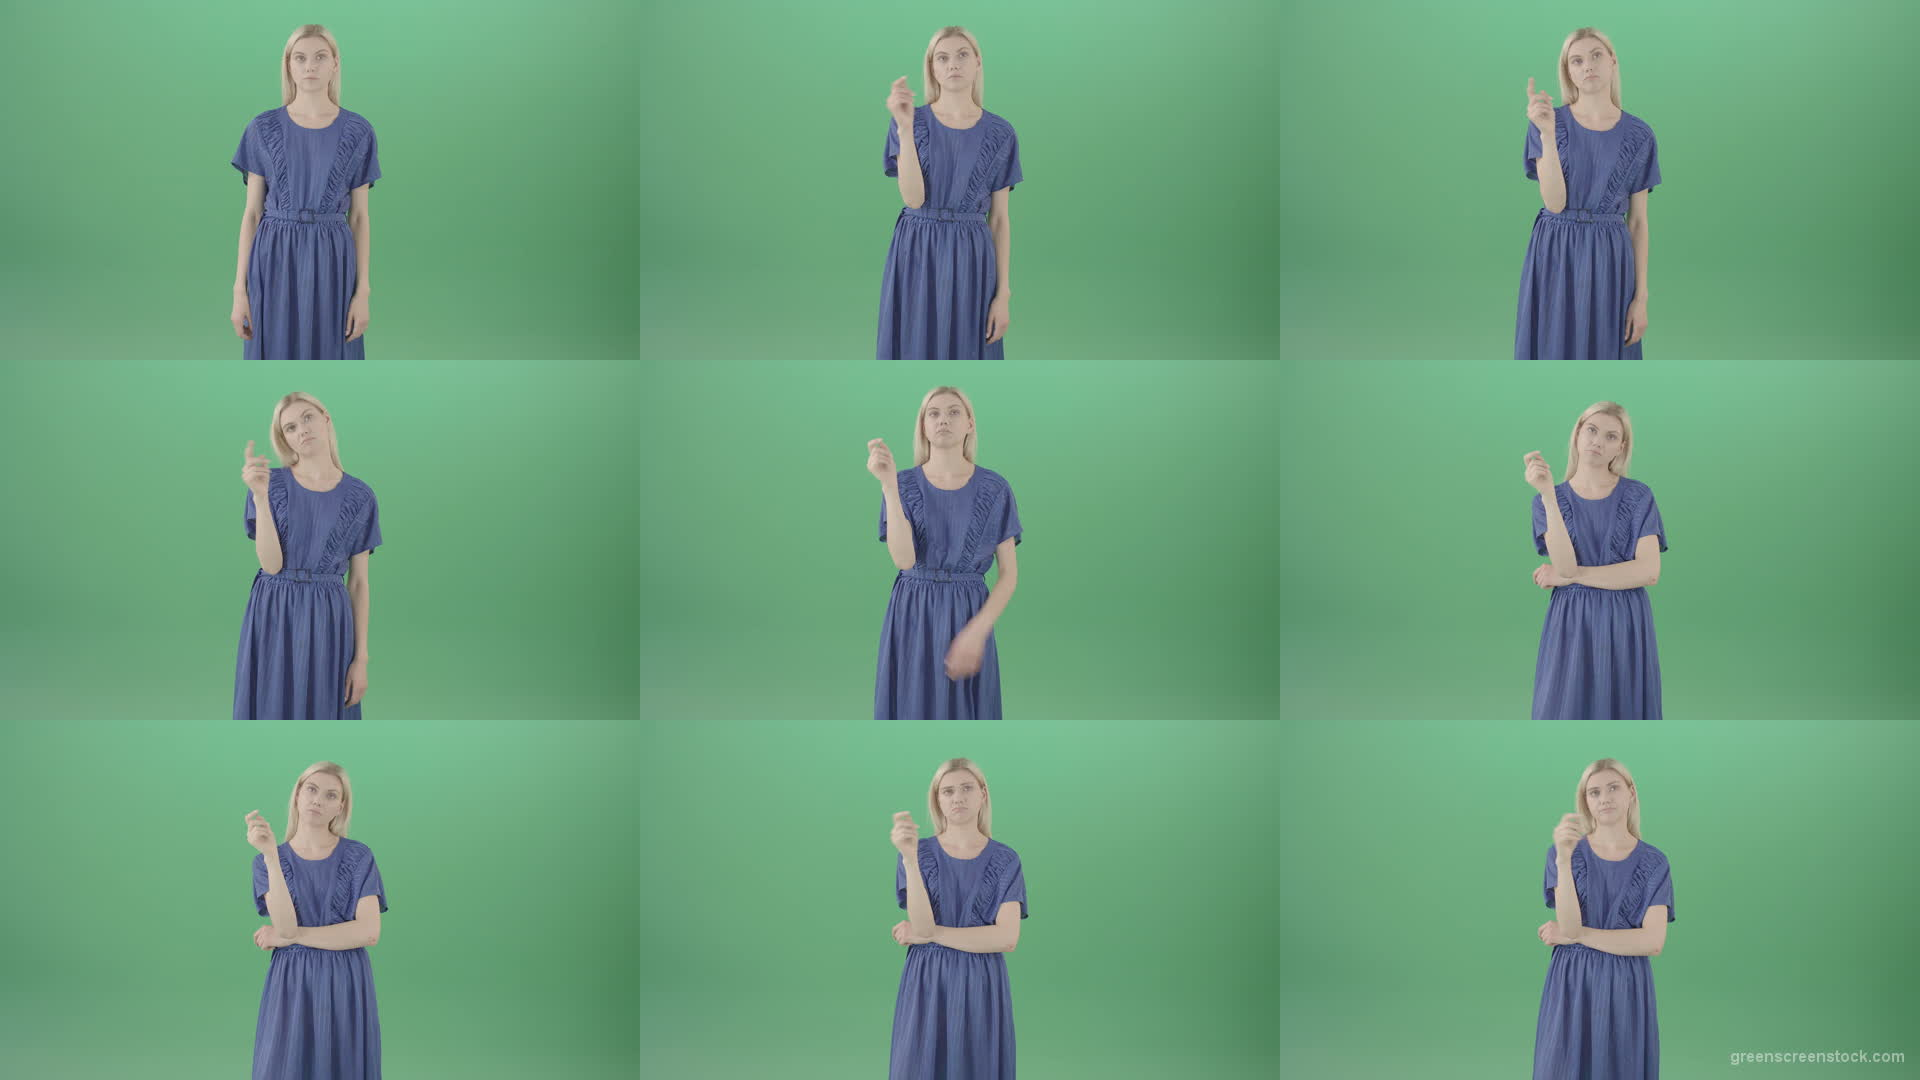 Boring-blonde-girl-in-blue-costume-can-not-find-virtual-products-on-touch-screen-isolated-on-green-background-4K-Video-Footage--1920 Green Screen Stock